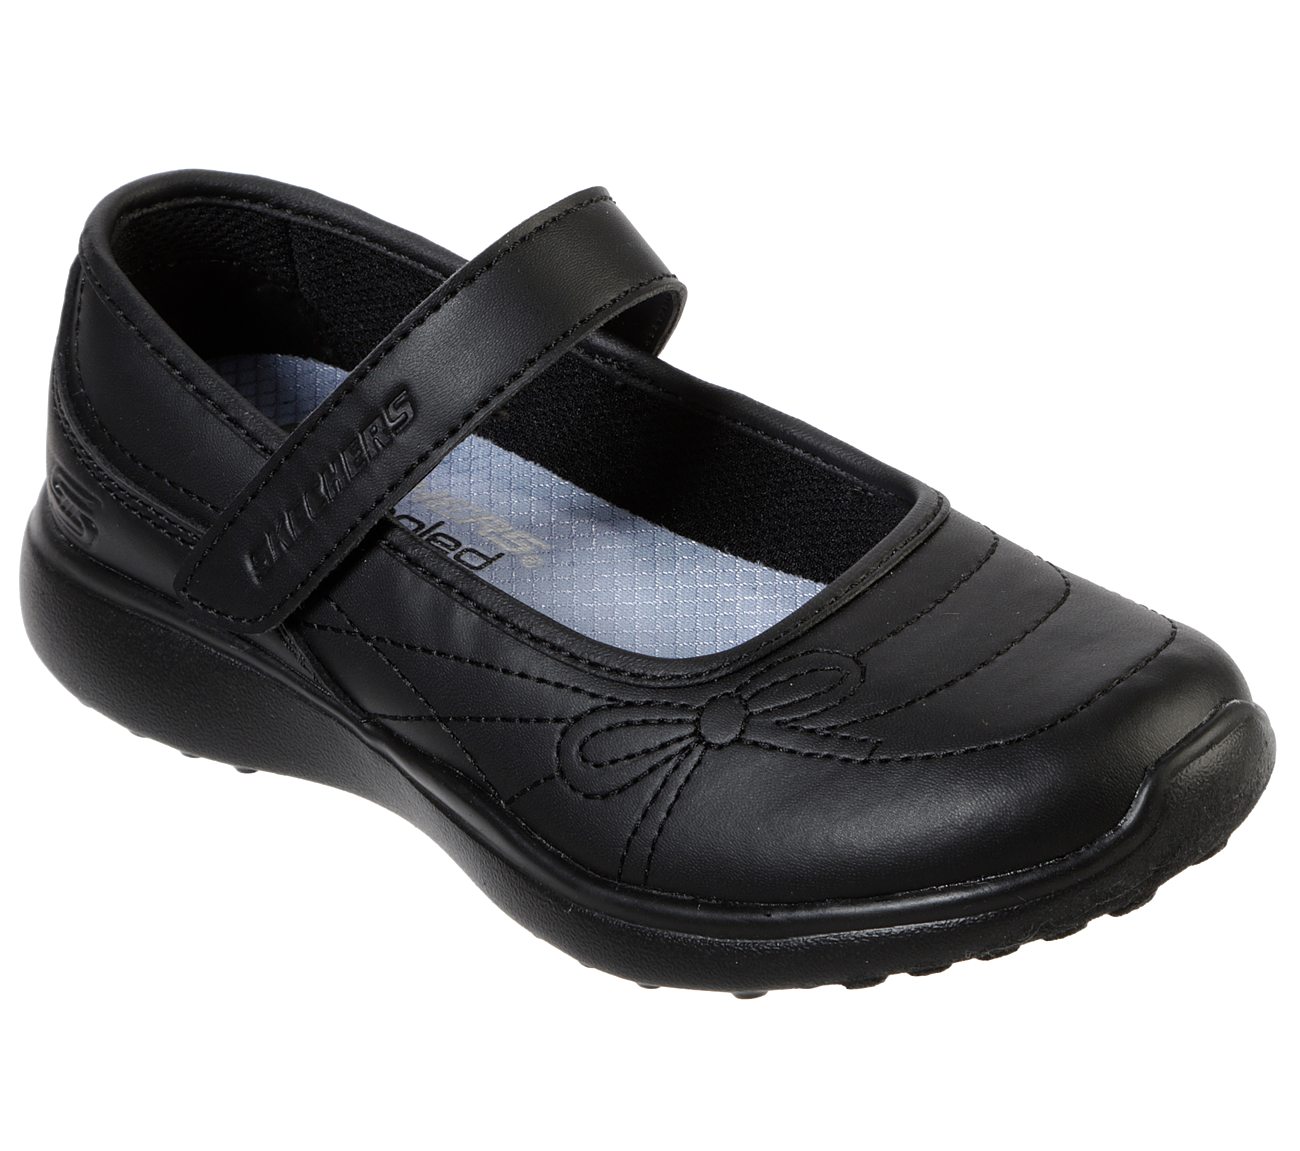 MICROSTRIDES-SCHOOL SWEETHEAR, BBLACK Footwear Lateral View